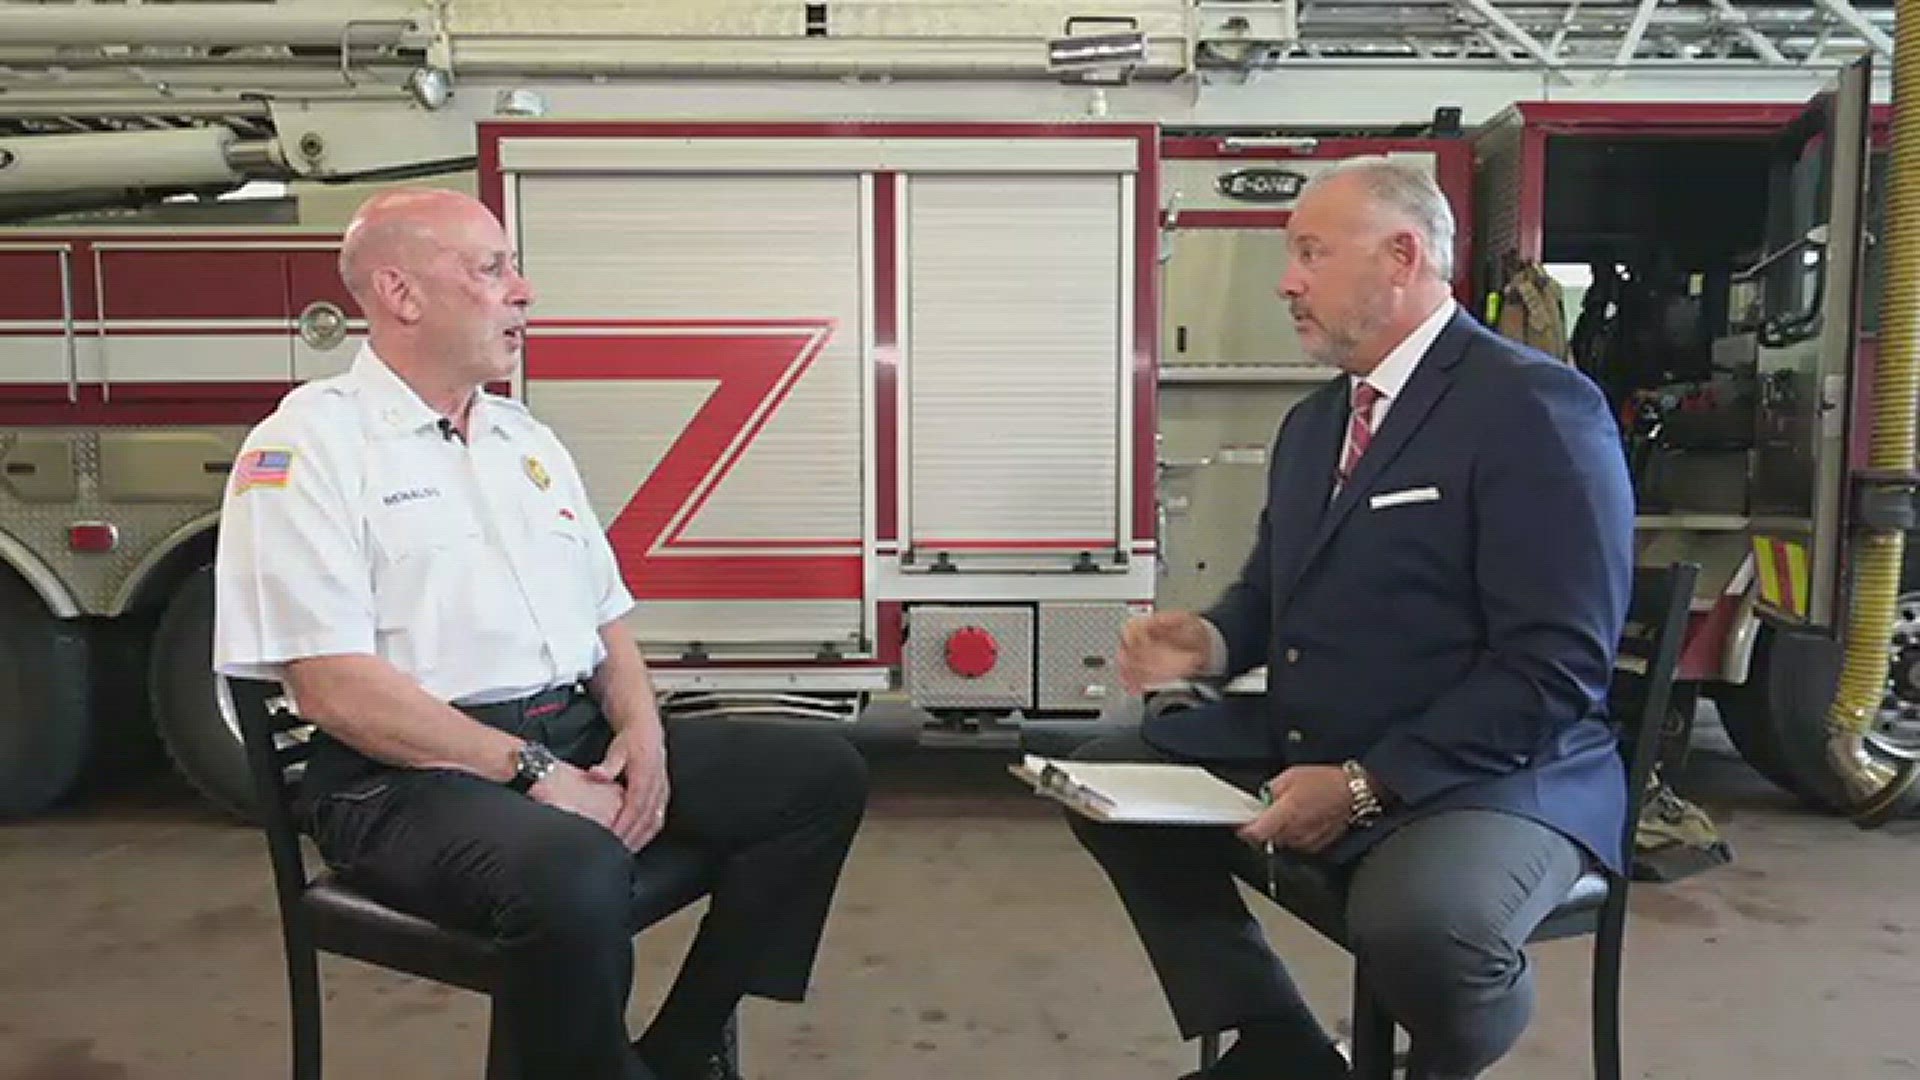 2 On Your Side's Scott Levin spoke to Buffalo Fire Commissioner William Renaldo.  Watch the full interview here.